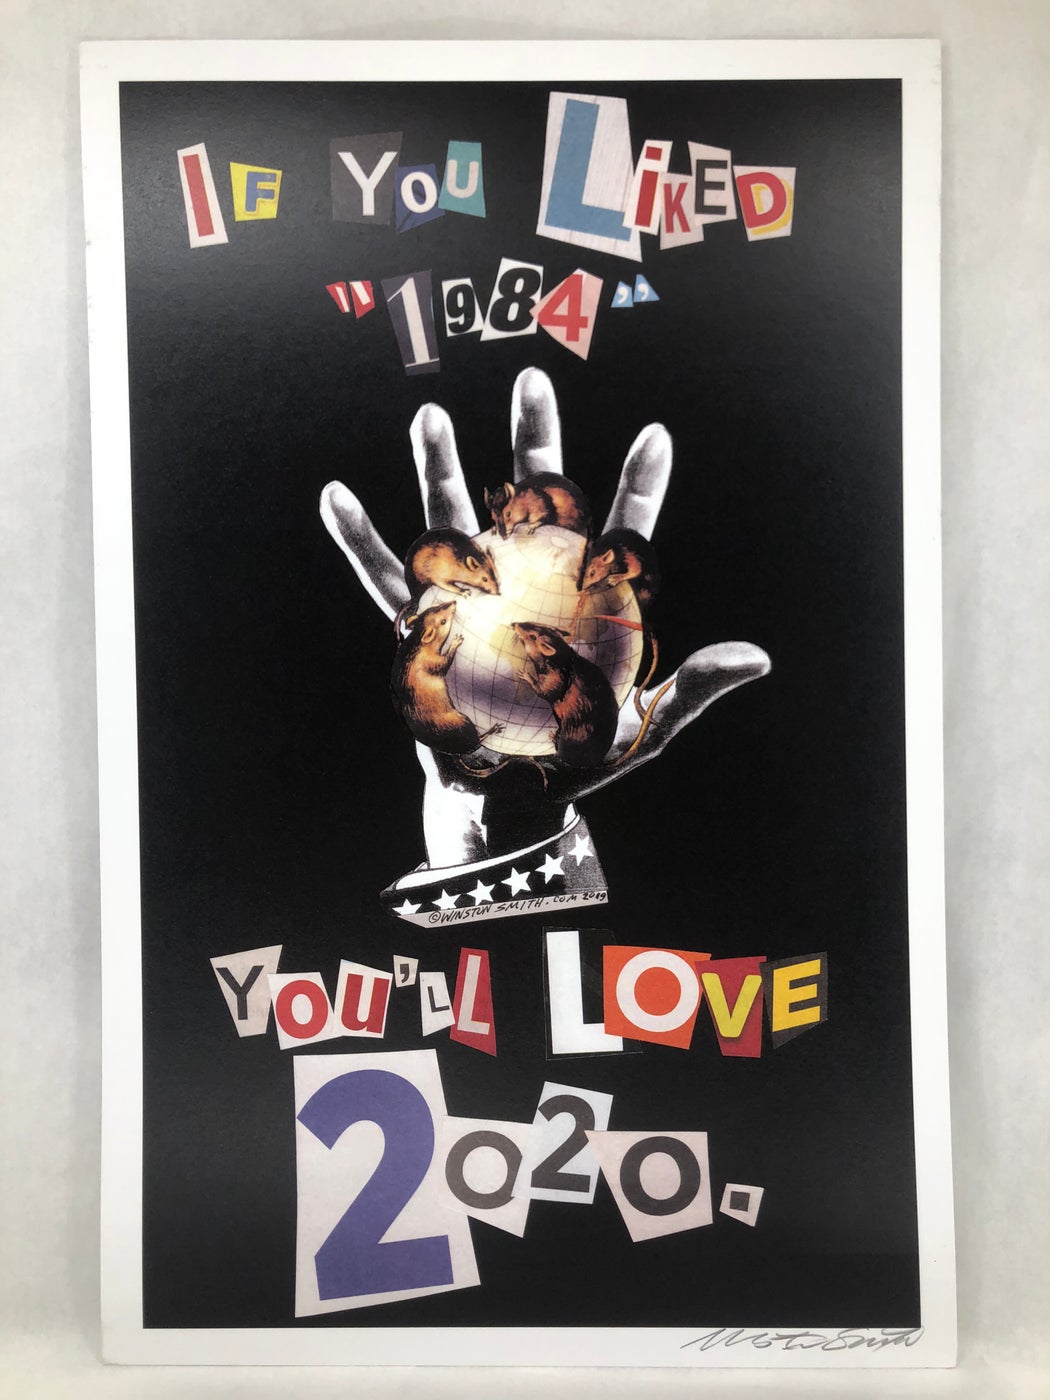 Winston Smith "If You Liked 1984, You'll Love 2020" Print (2019)